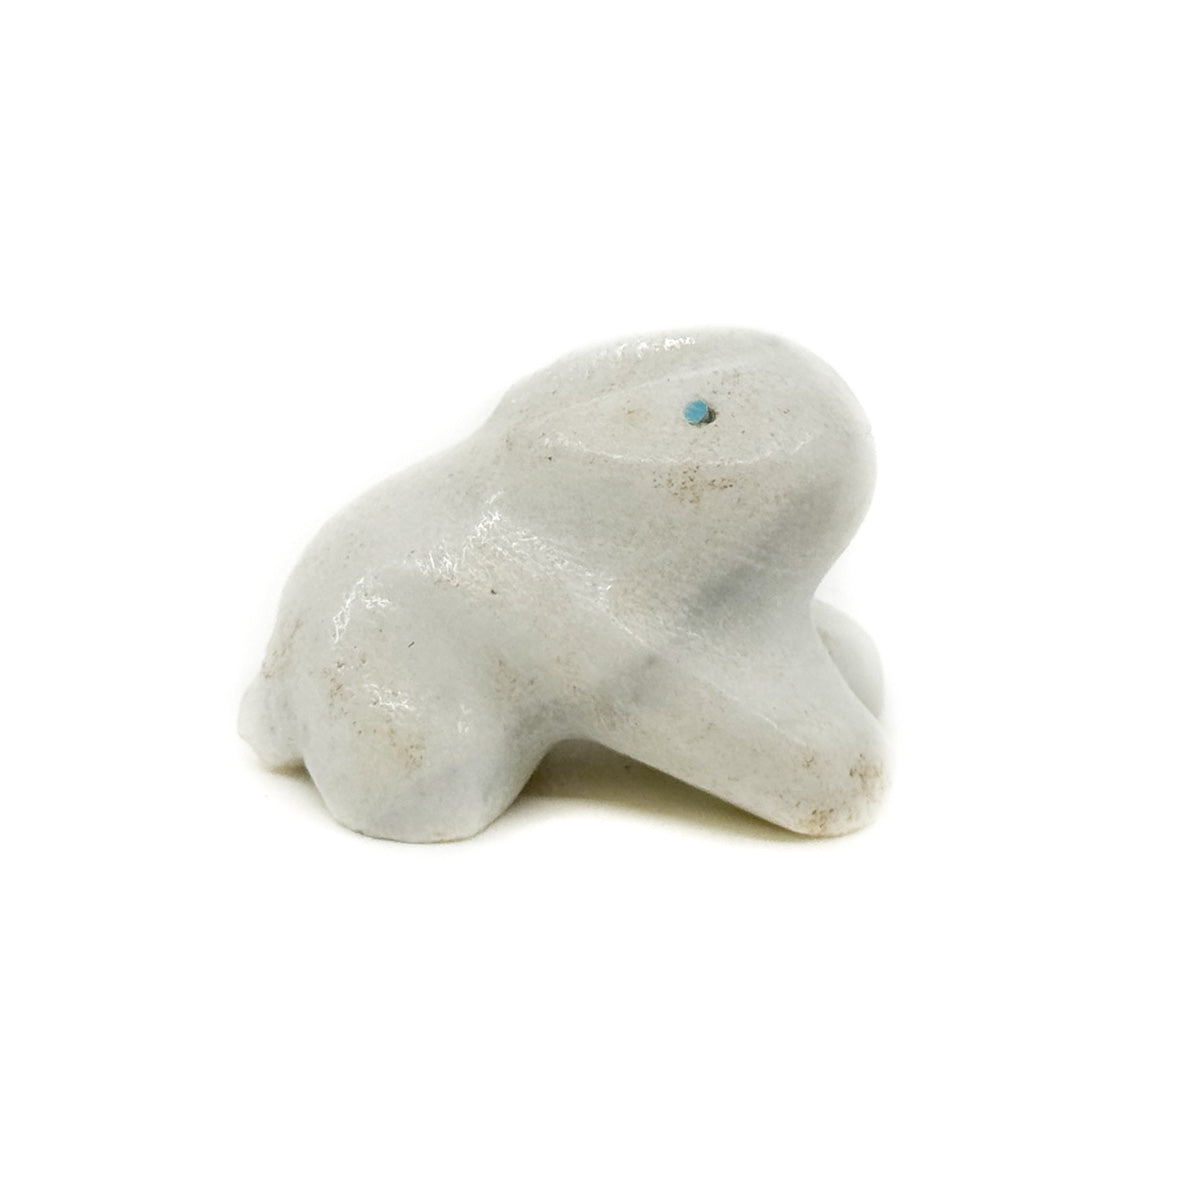 Small White Rabbit Carving by Rick Quam